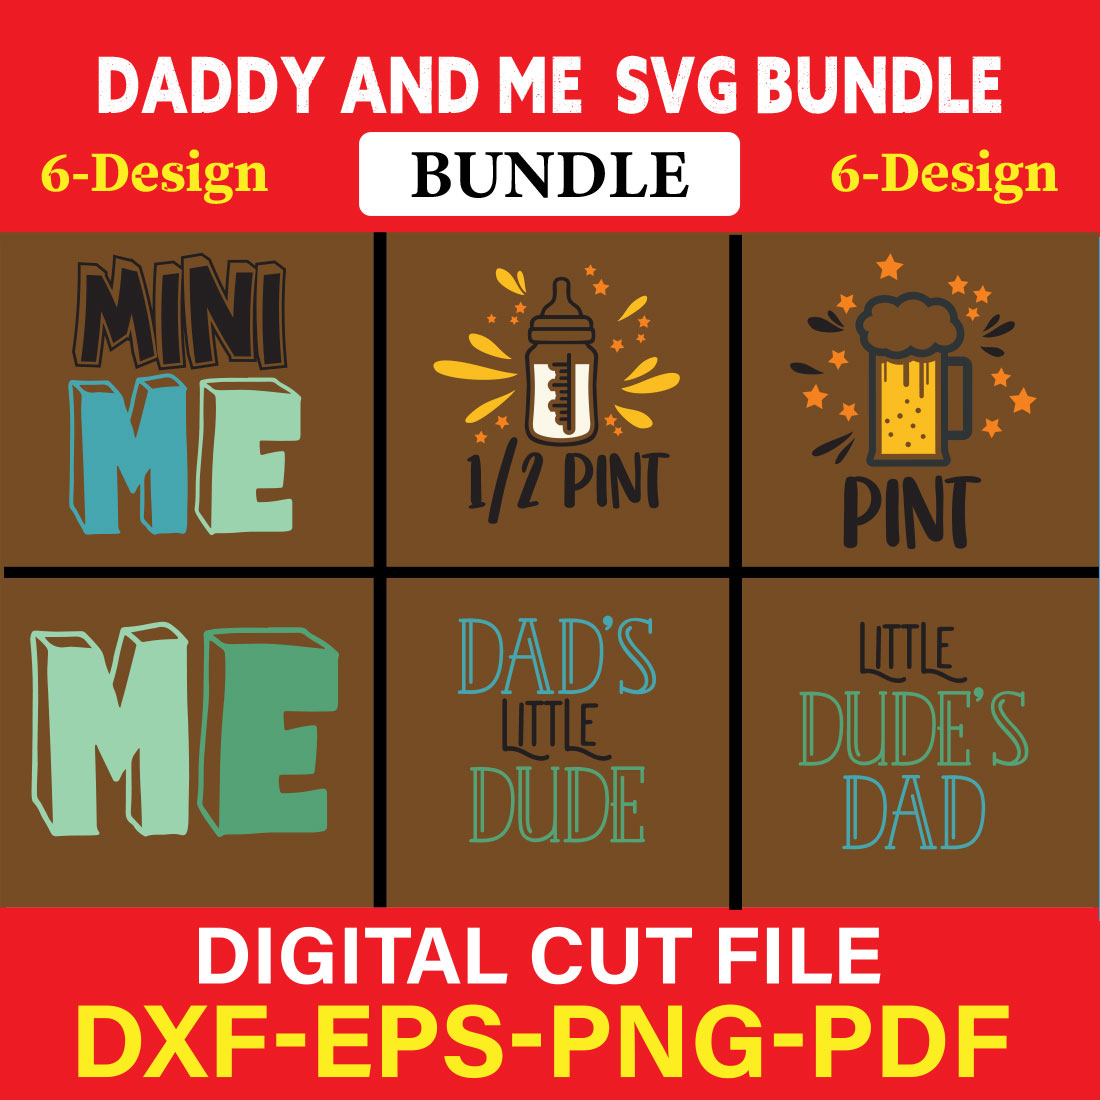 Daddy And Me T-shirt Design Bundle Vol-2 cover image.